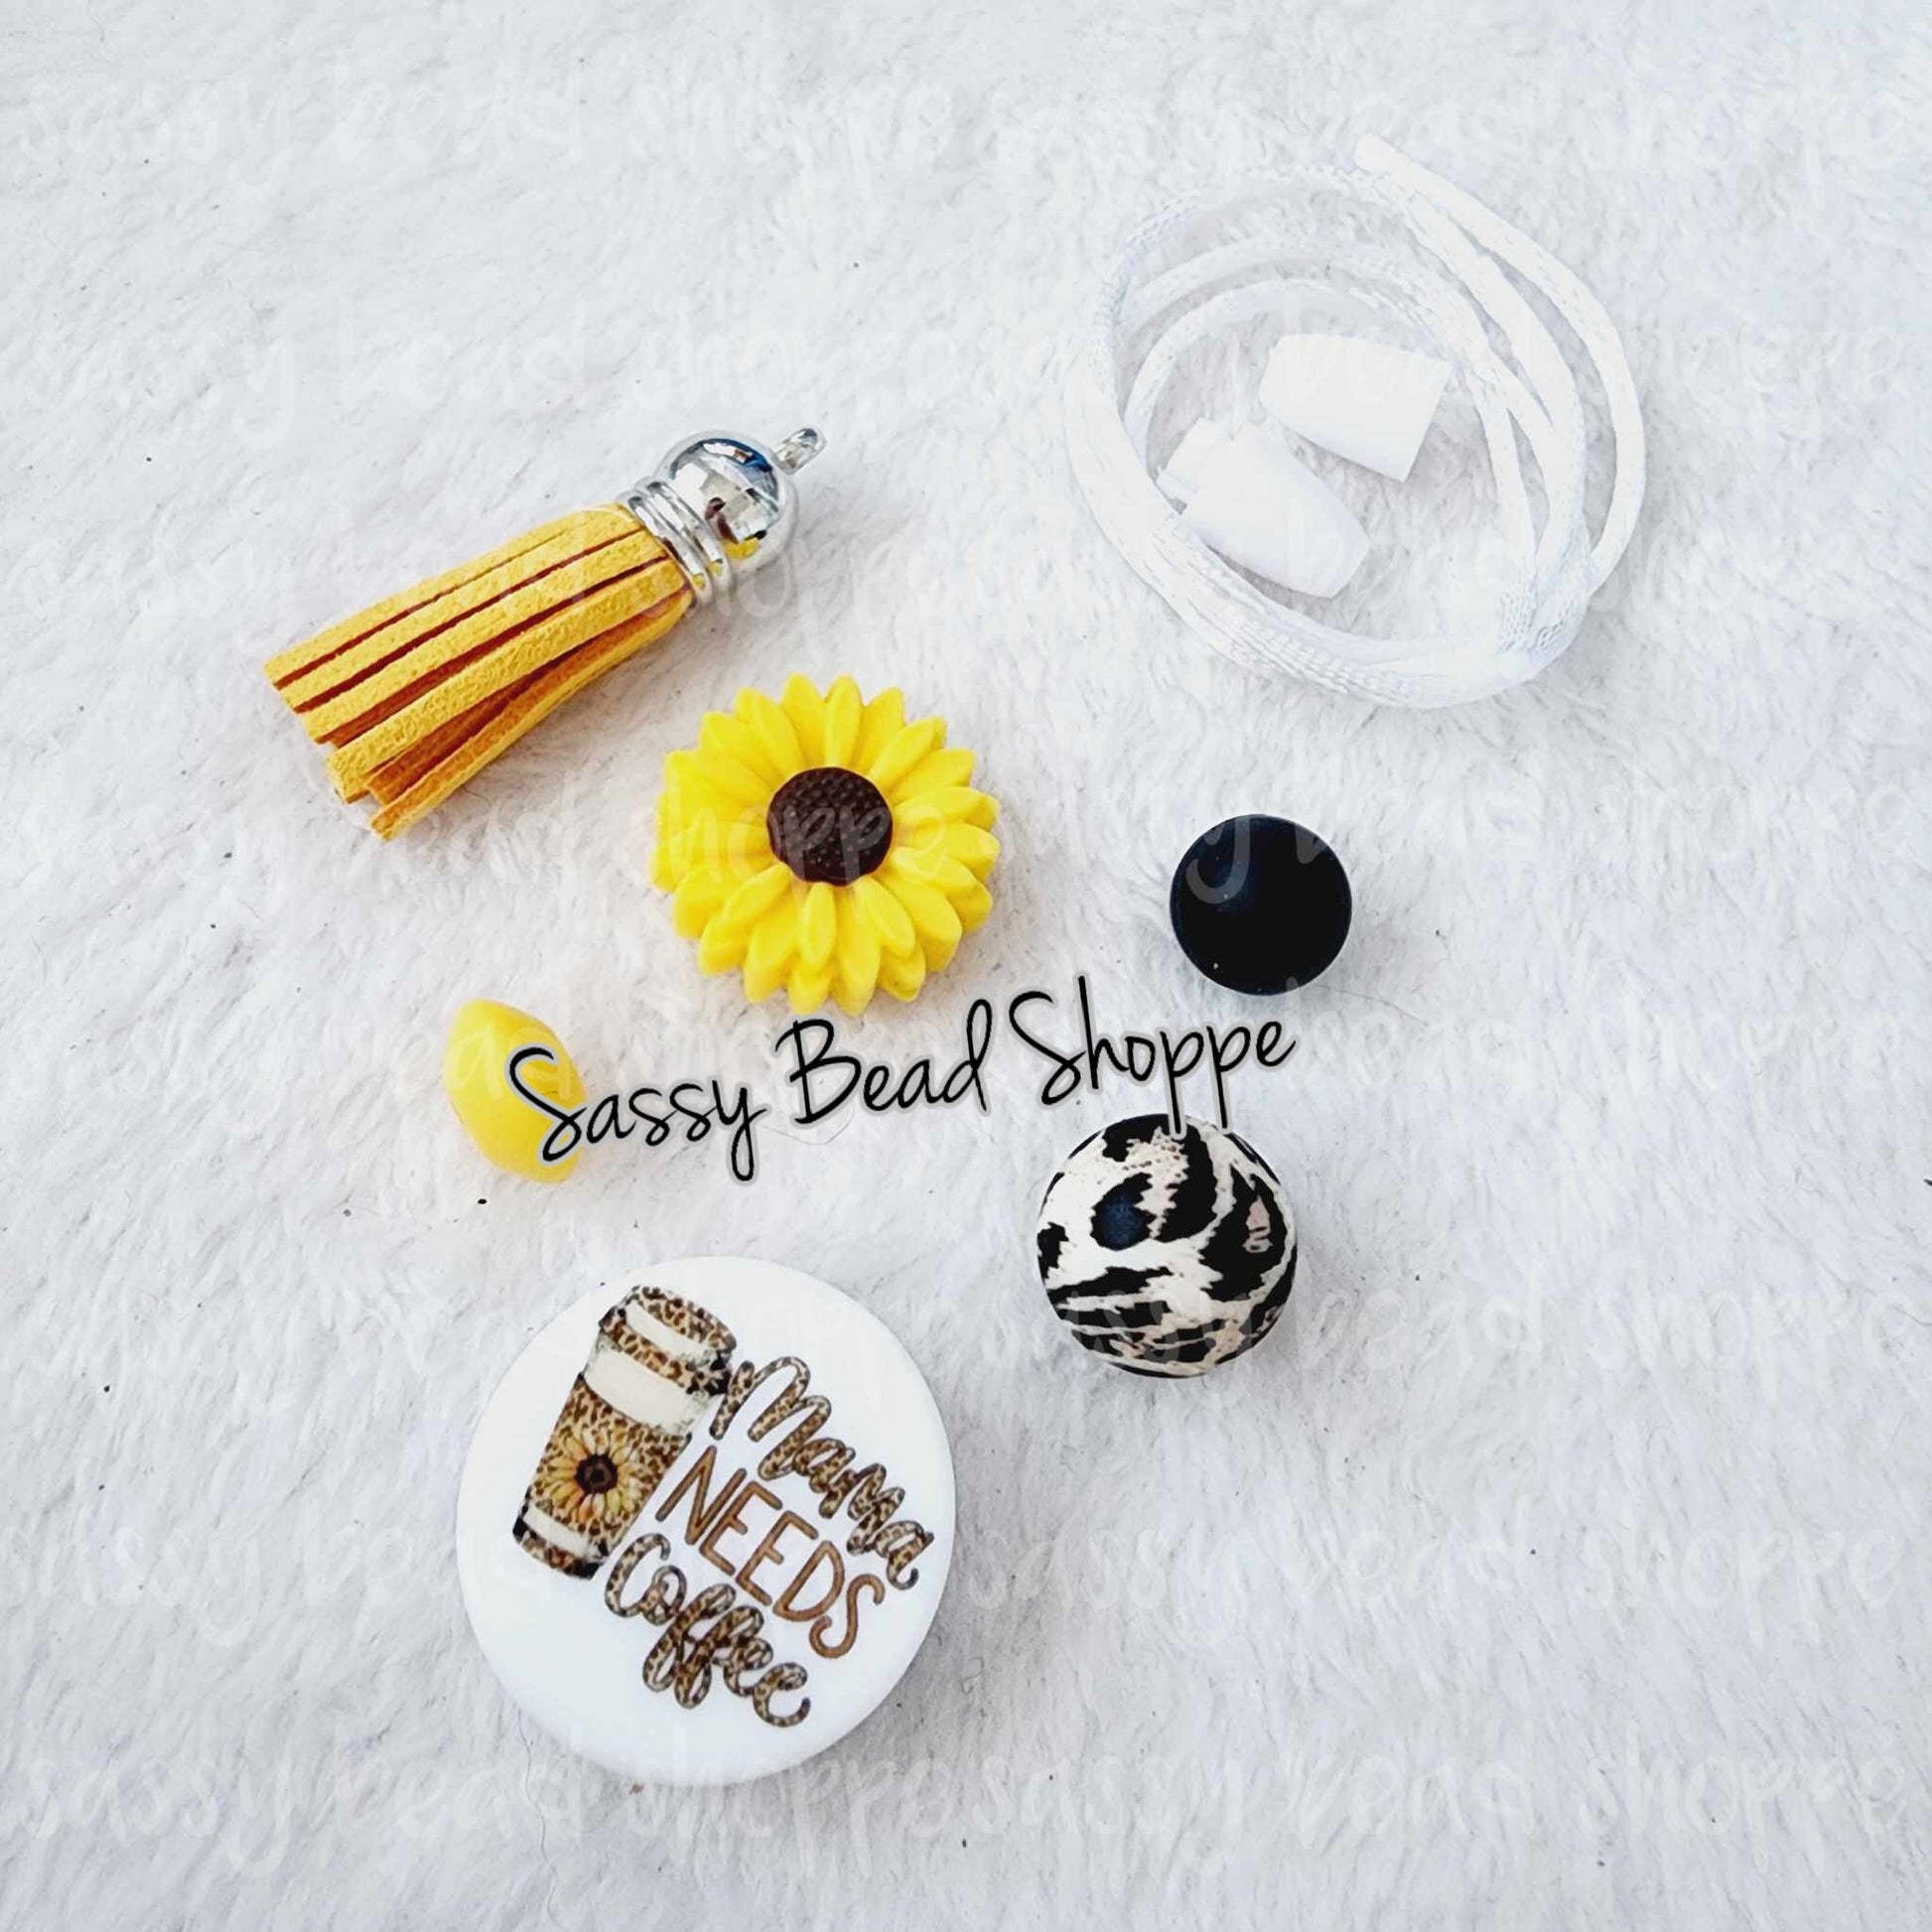 Sassy Bead Shoppe Coffee & Sunshine Car Charm What you will receive in your kit